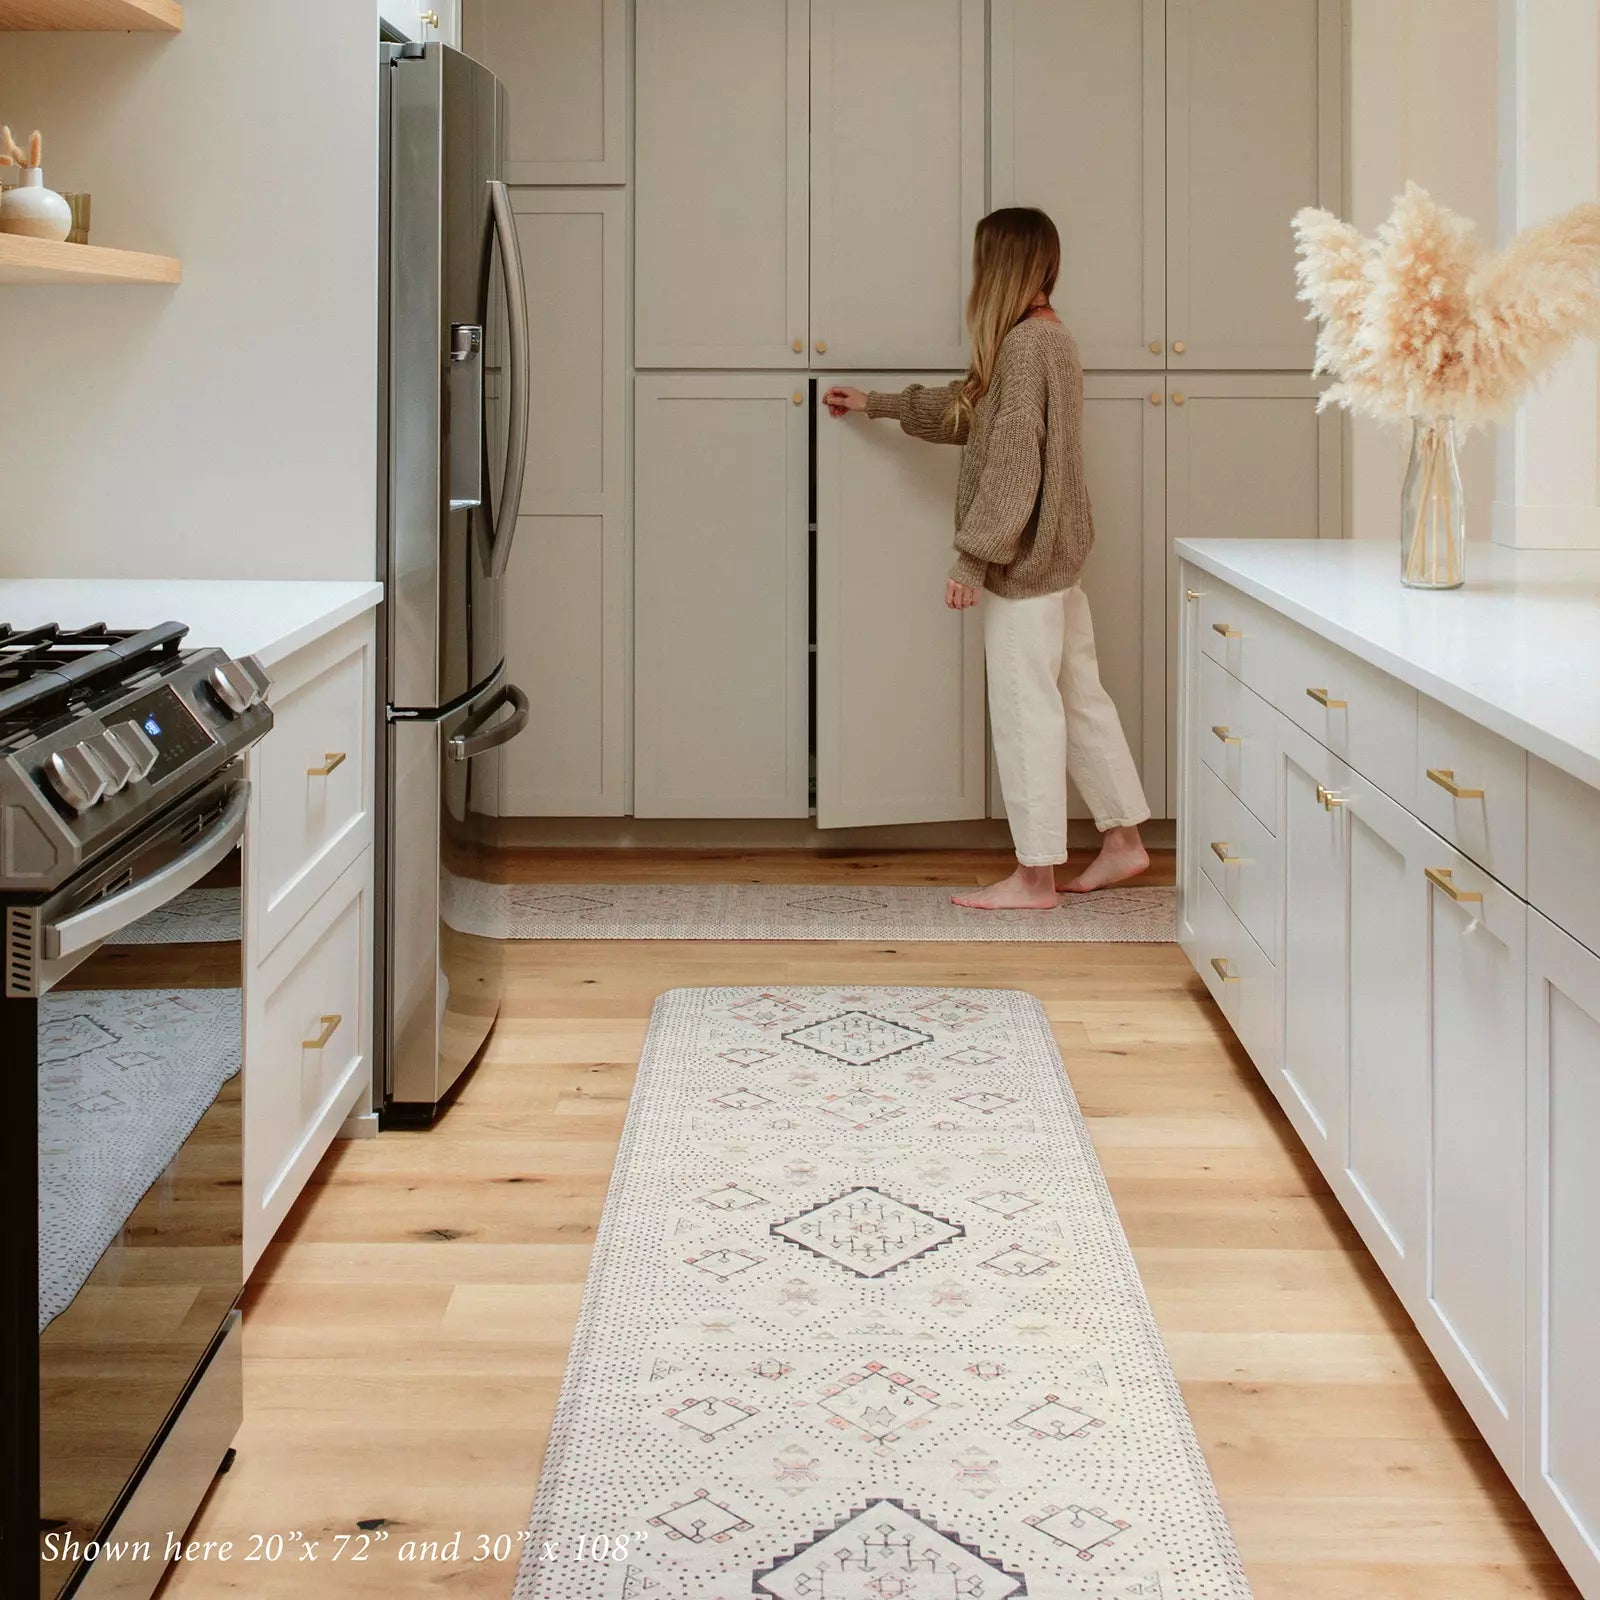 Oat Neutral Beige Minimal Boho Pattern Standing Mat in kitchen with woman shown in size 20x72 and 30x108